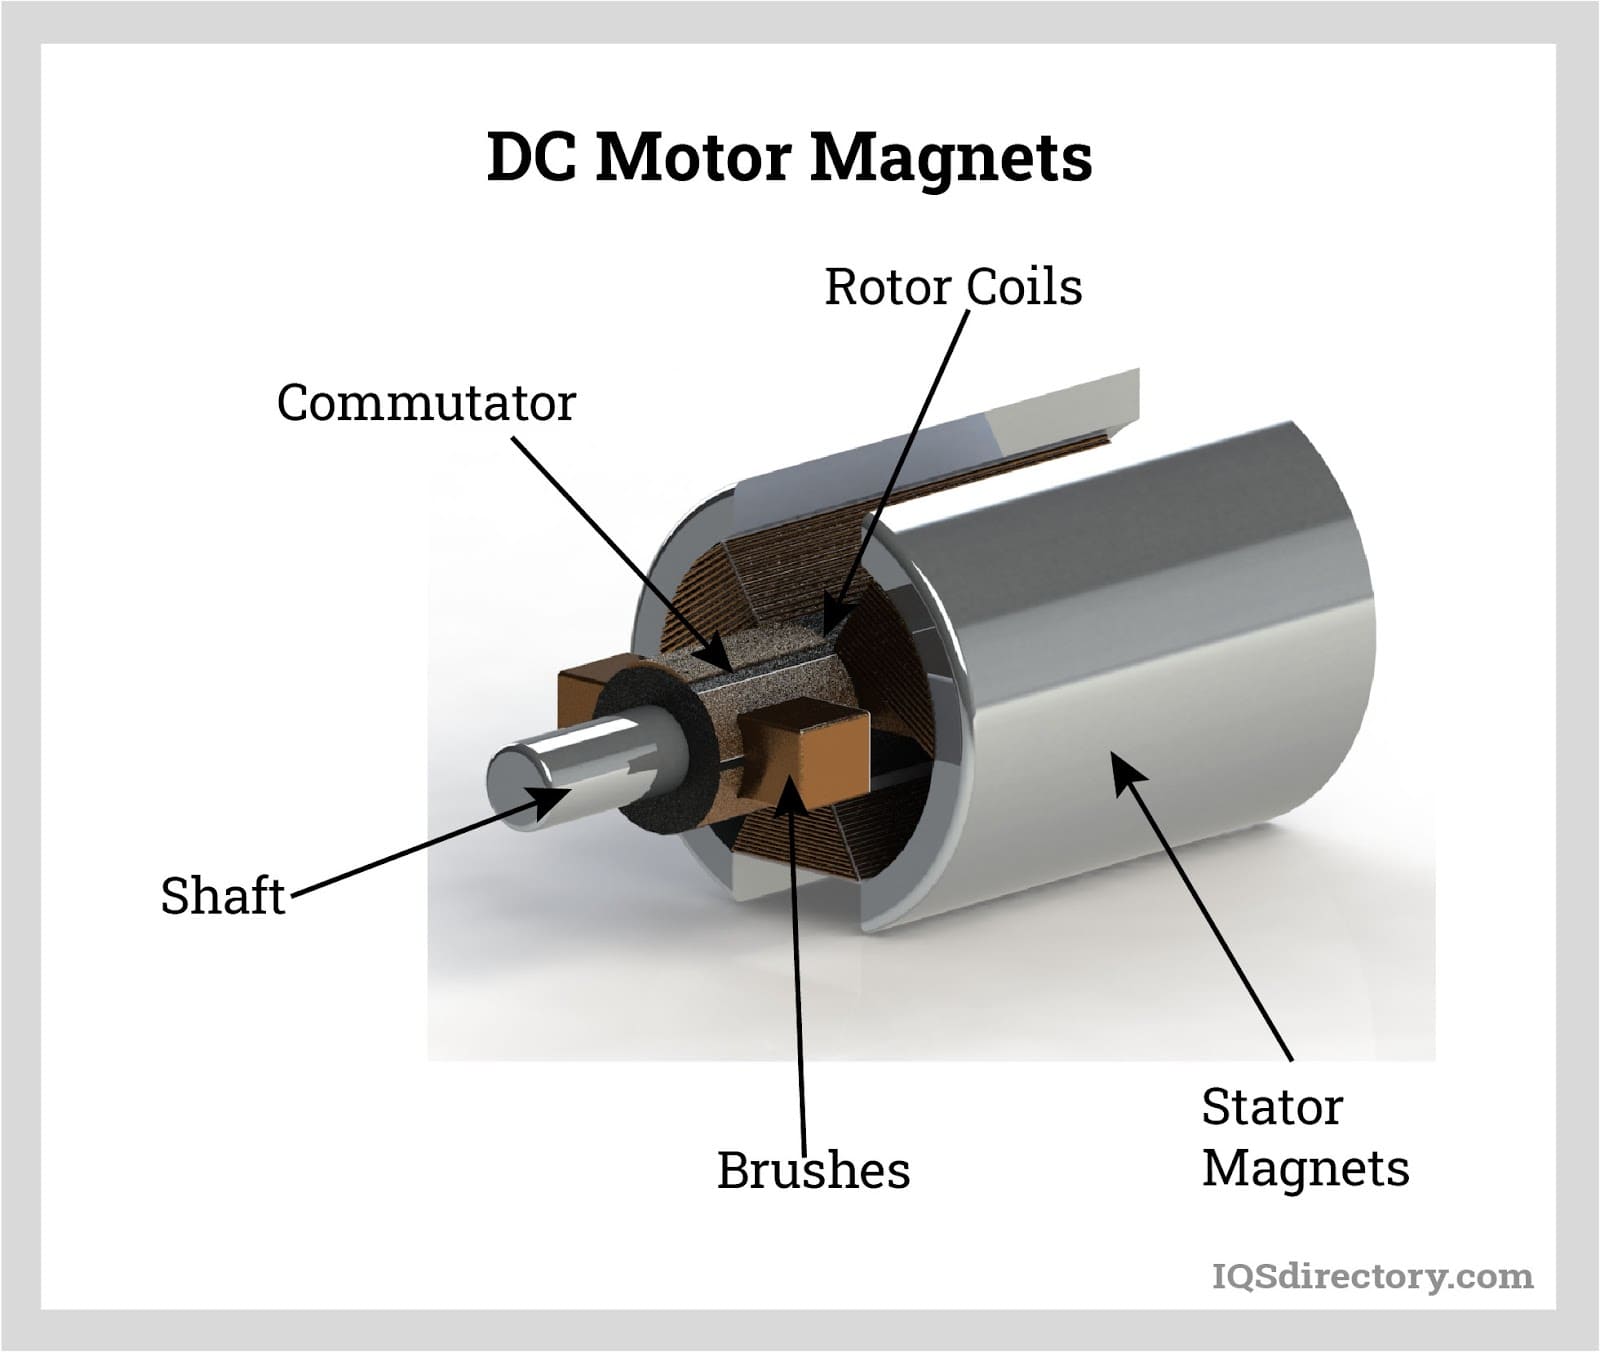 DC Motor: What Is It? How Does It Work? Types, Uses